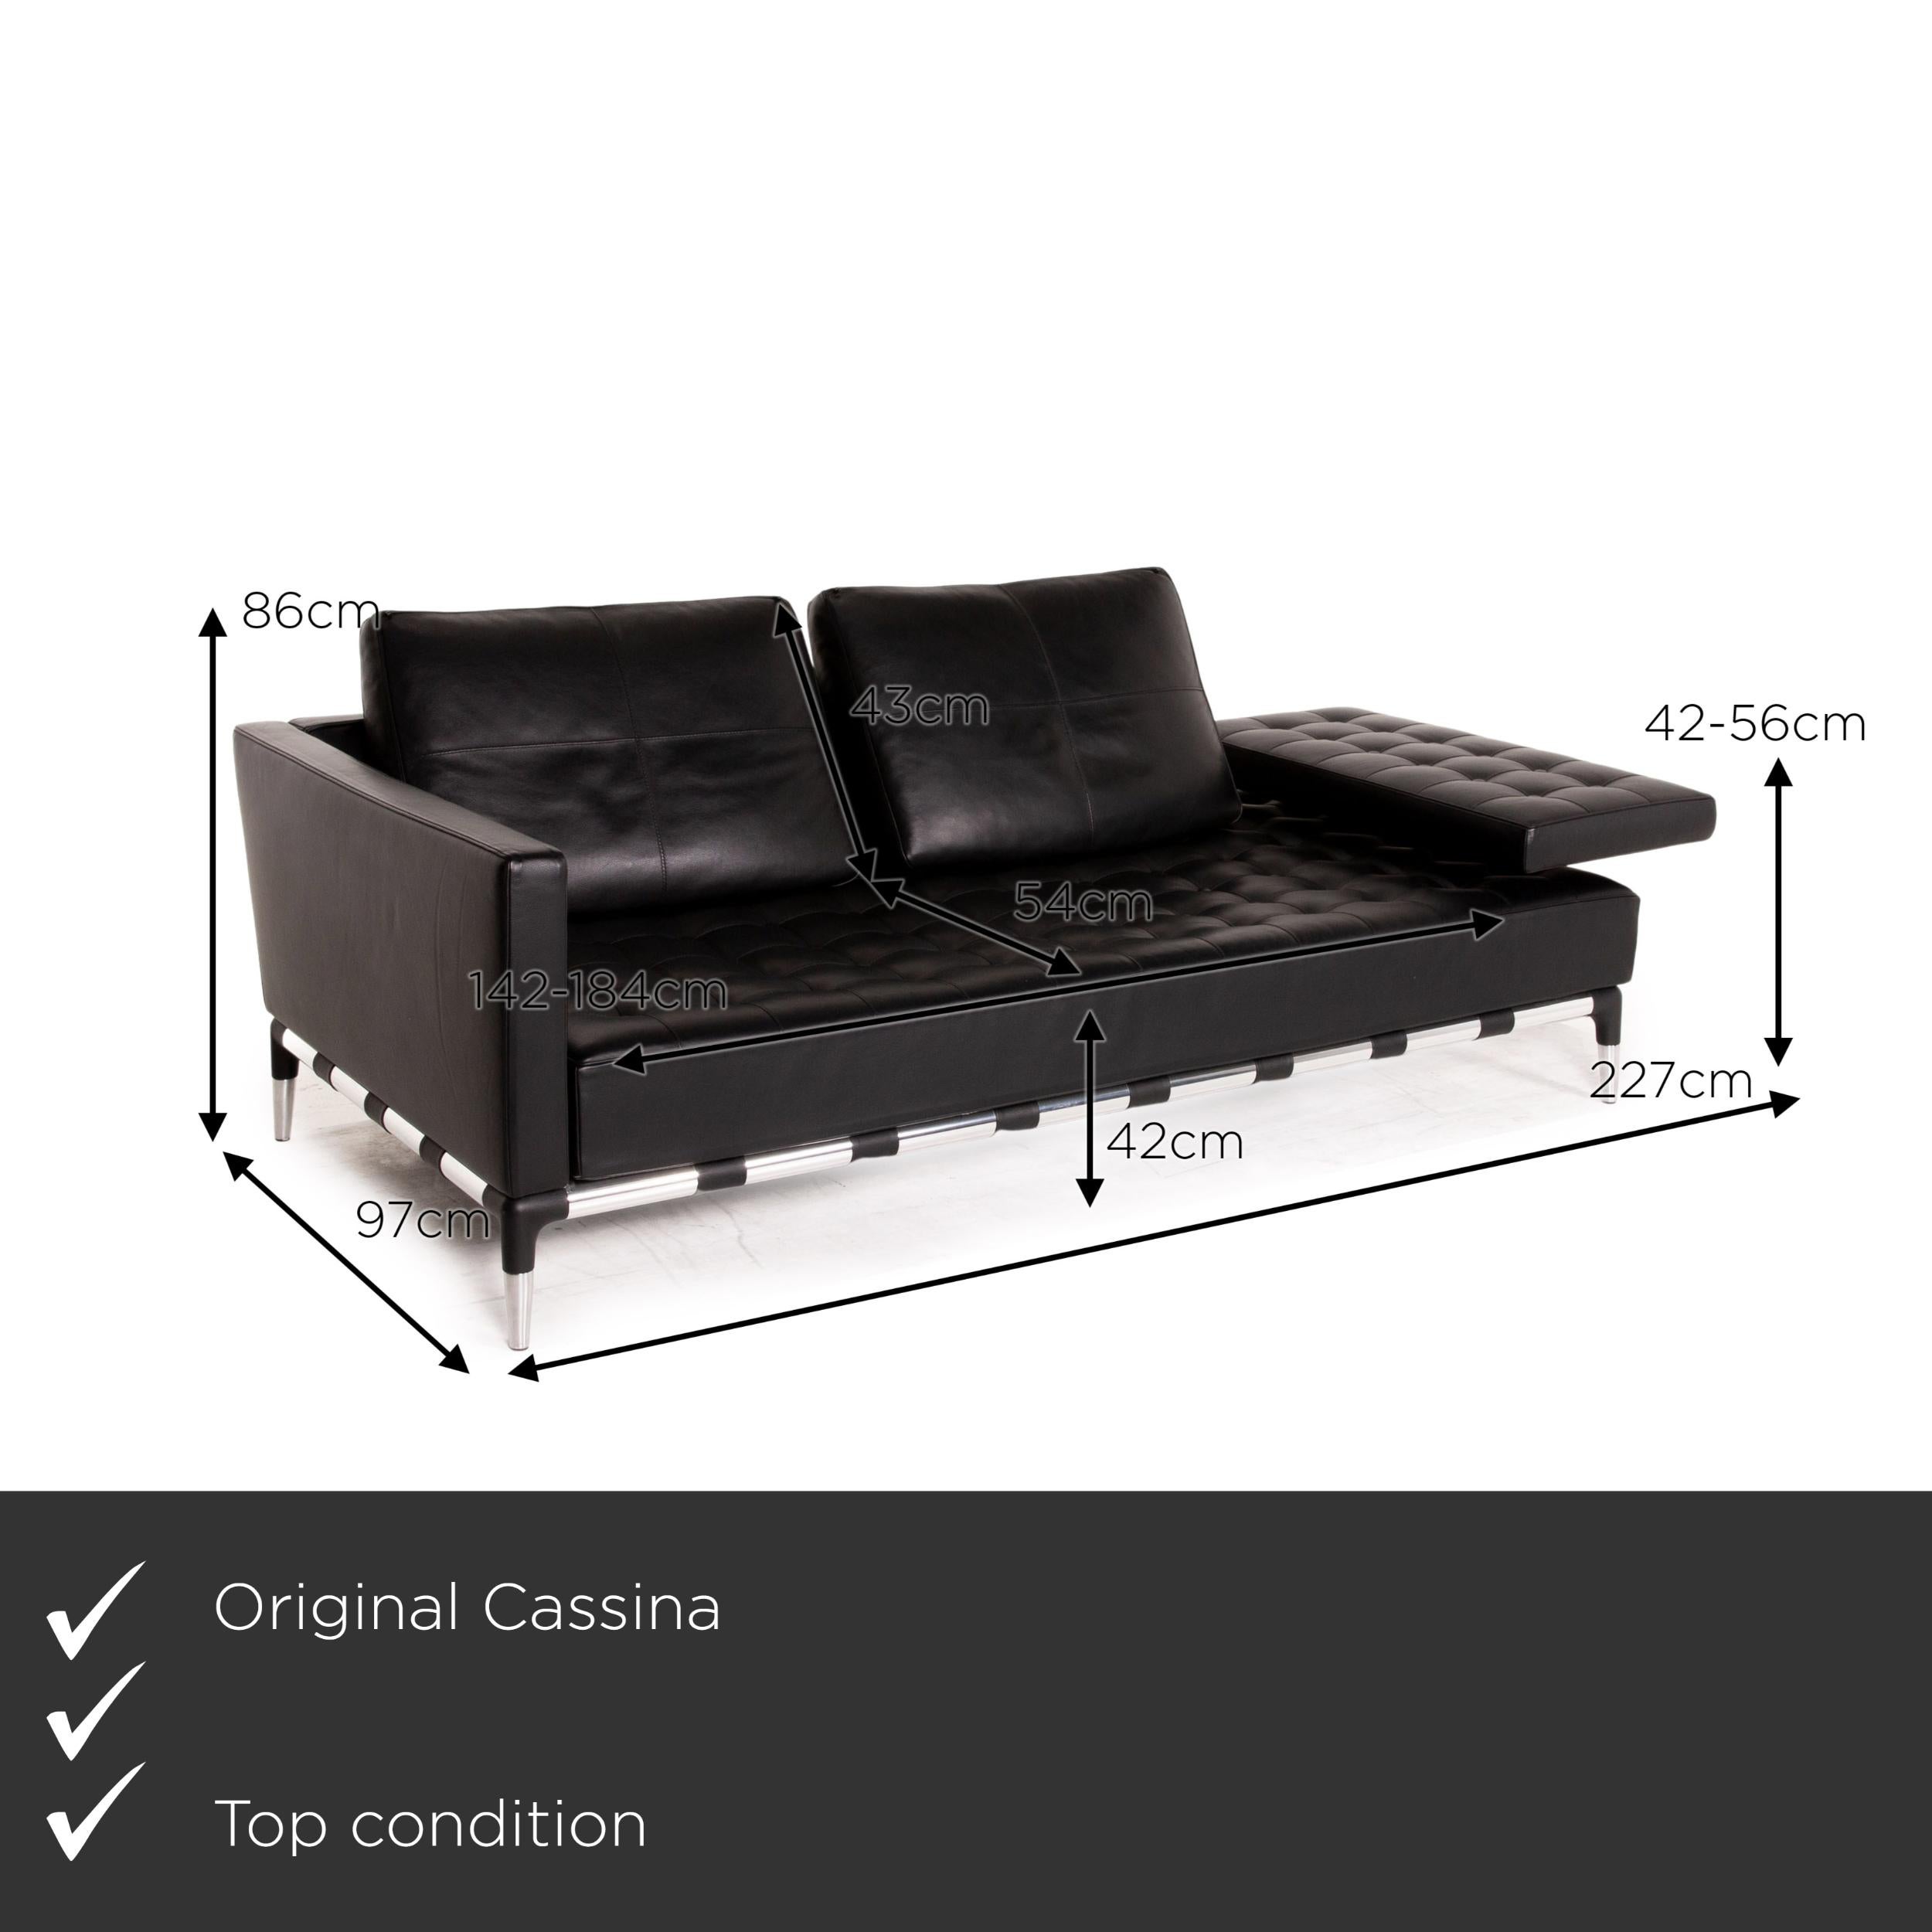 We present to you a Cassina 241 Privè Divano leather sofa black three-seater couch.


 Product measurements in centimeters:
 

Depth: 97
Width: 227
Height: 86
Seat height: 42
Rest height: 56
Seat depth: 54
Seat width: 142
Back height: